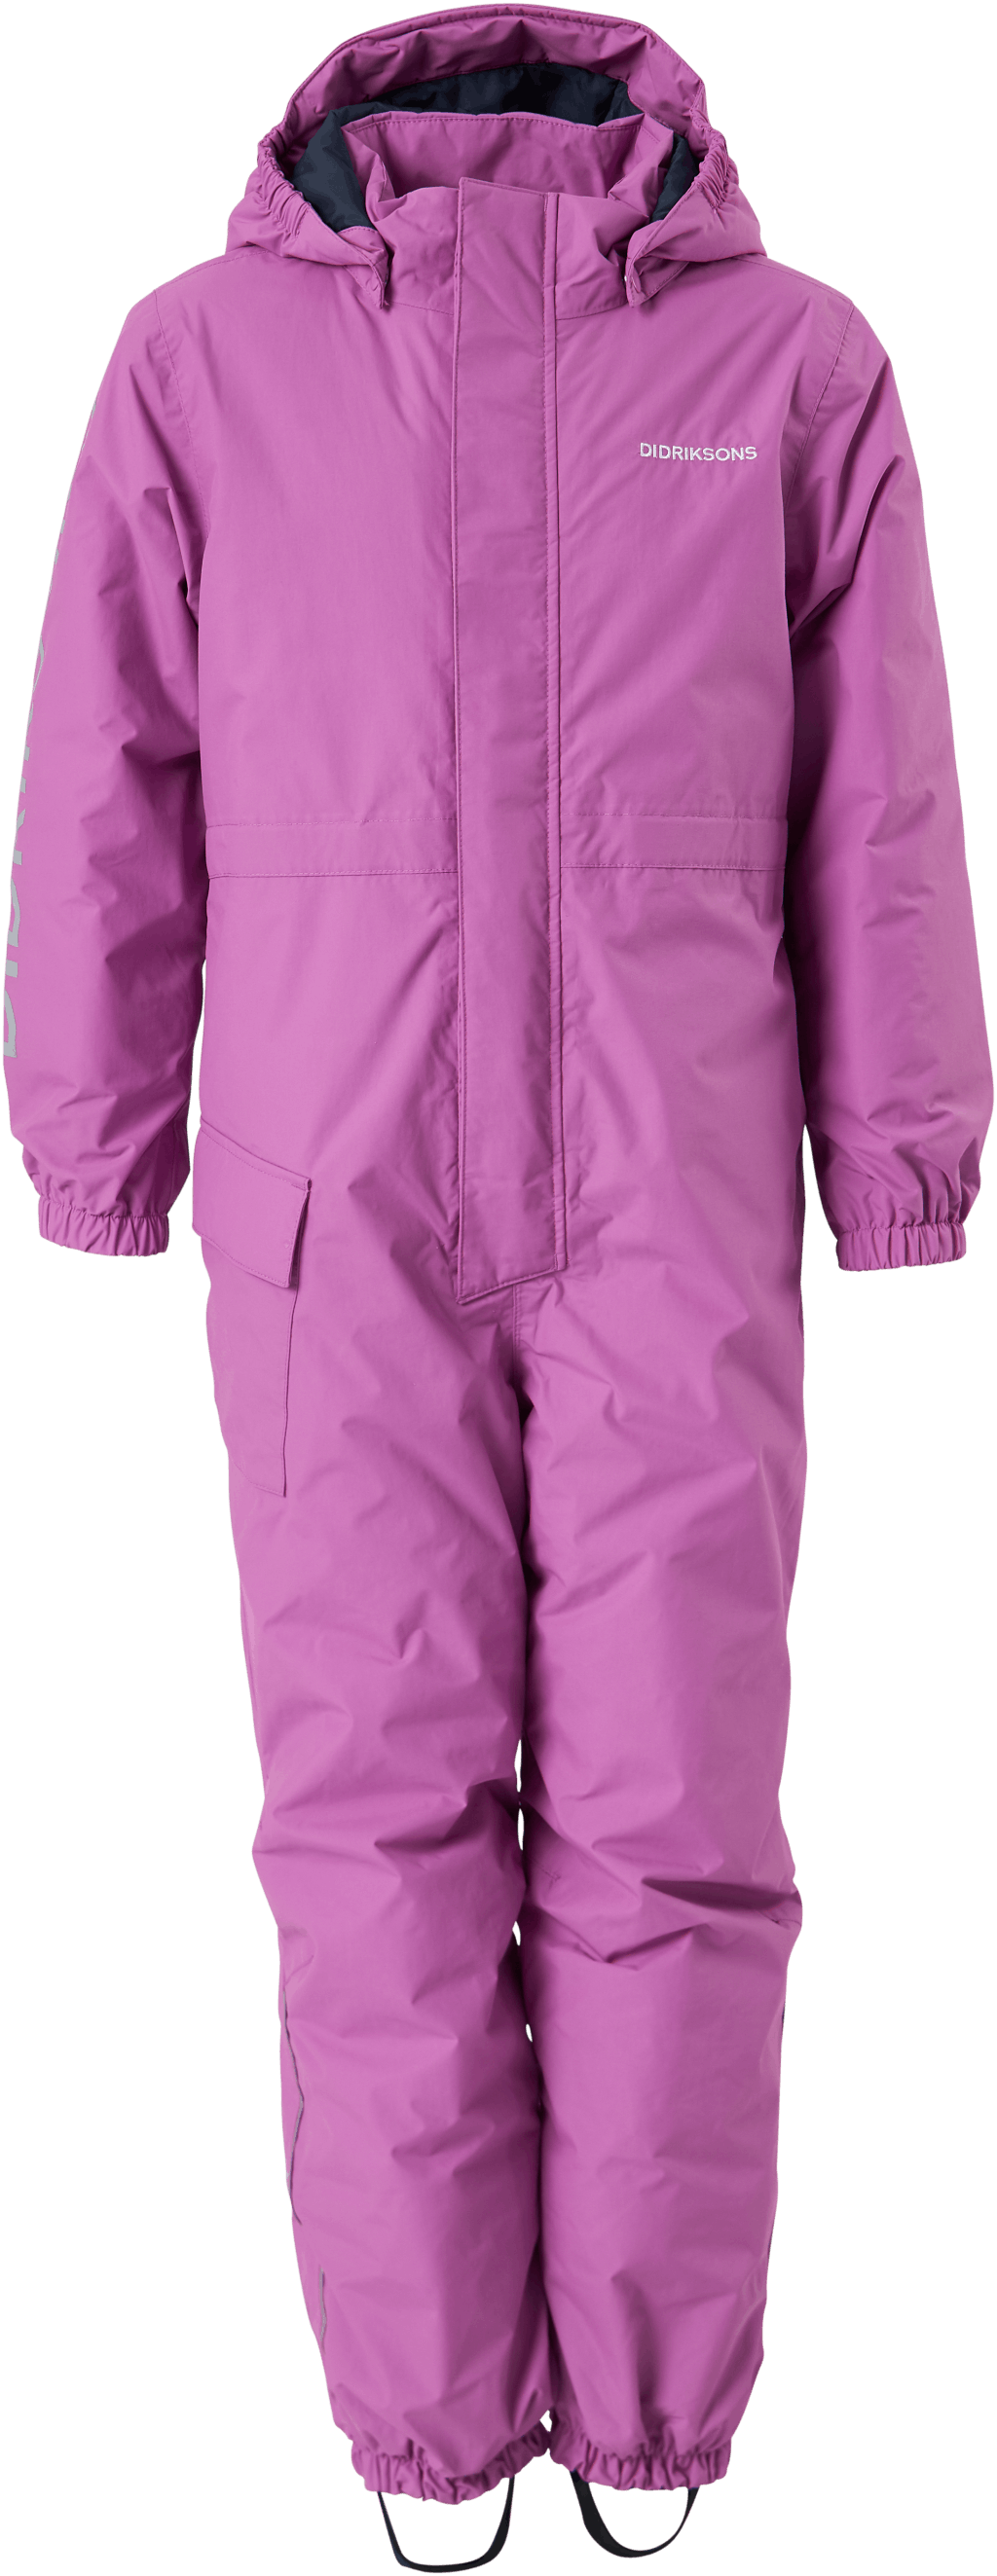 Hailey Kids Cover 2 Radiant Purple